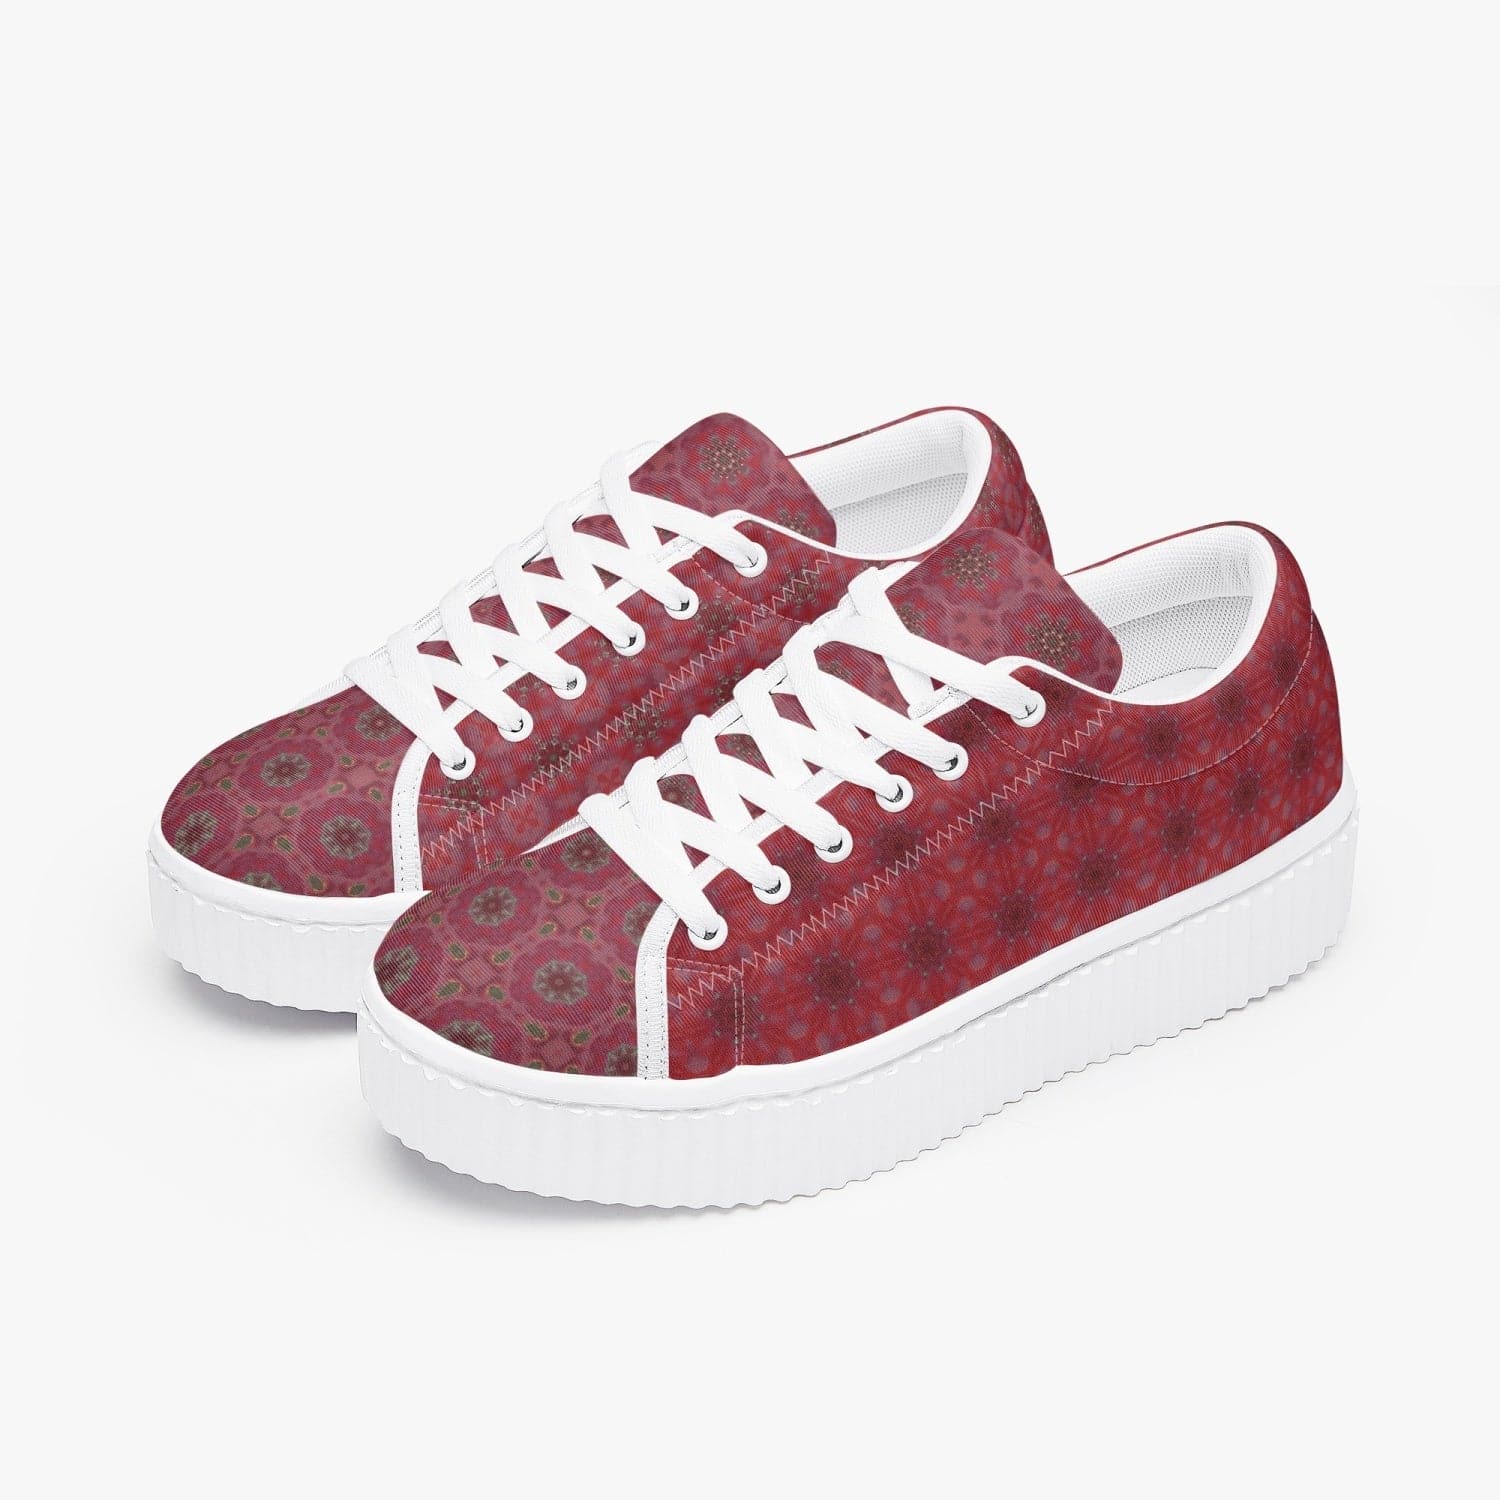 Red Wine rosy patterned Stylish Women’s Low Top Mesh Platform Sneakers, by Sensus Studio Design